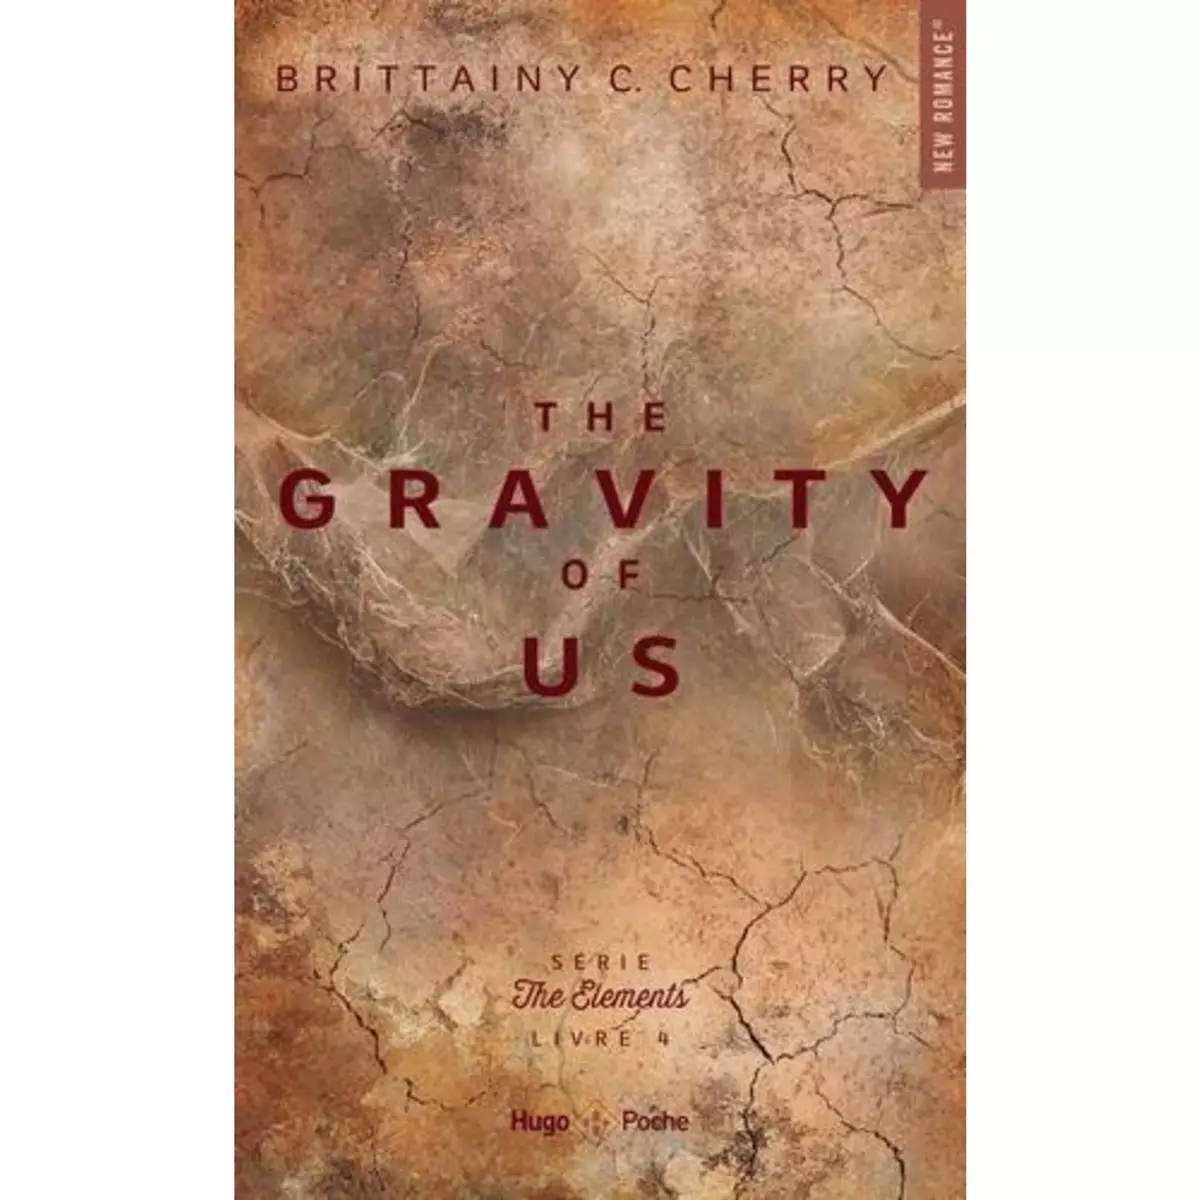  THE ELEMENTS TOME 4 : THE GRAVITY OF US, Cherry Brittainy C.